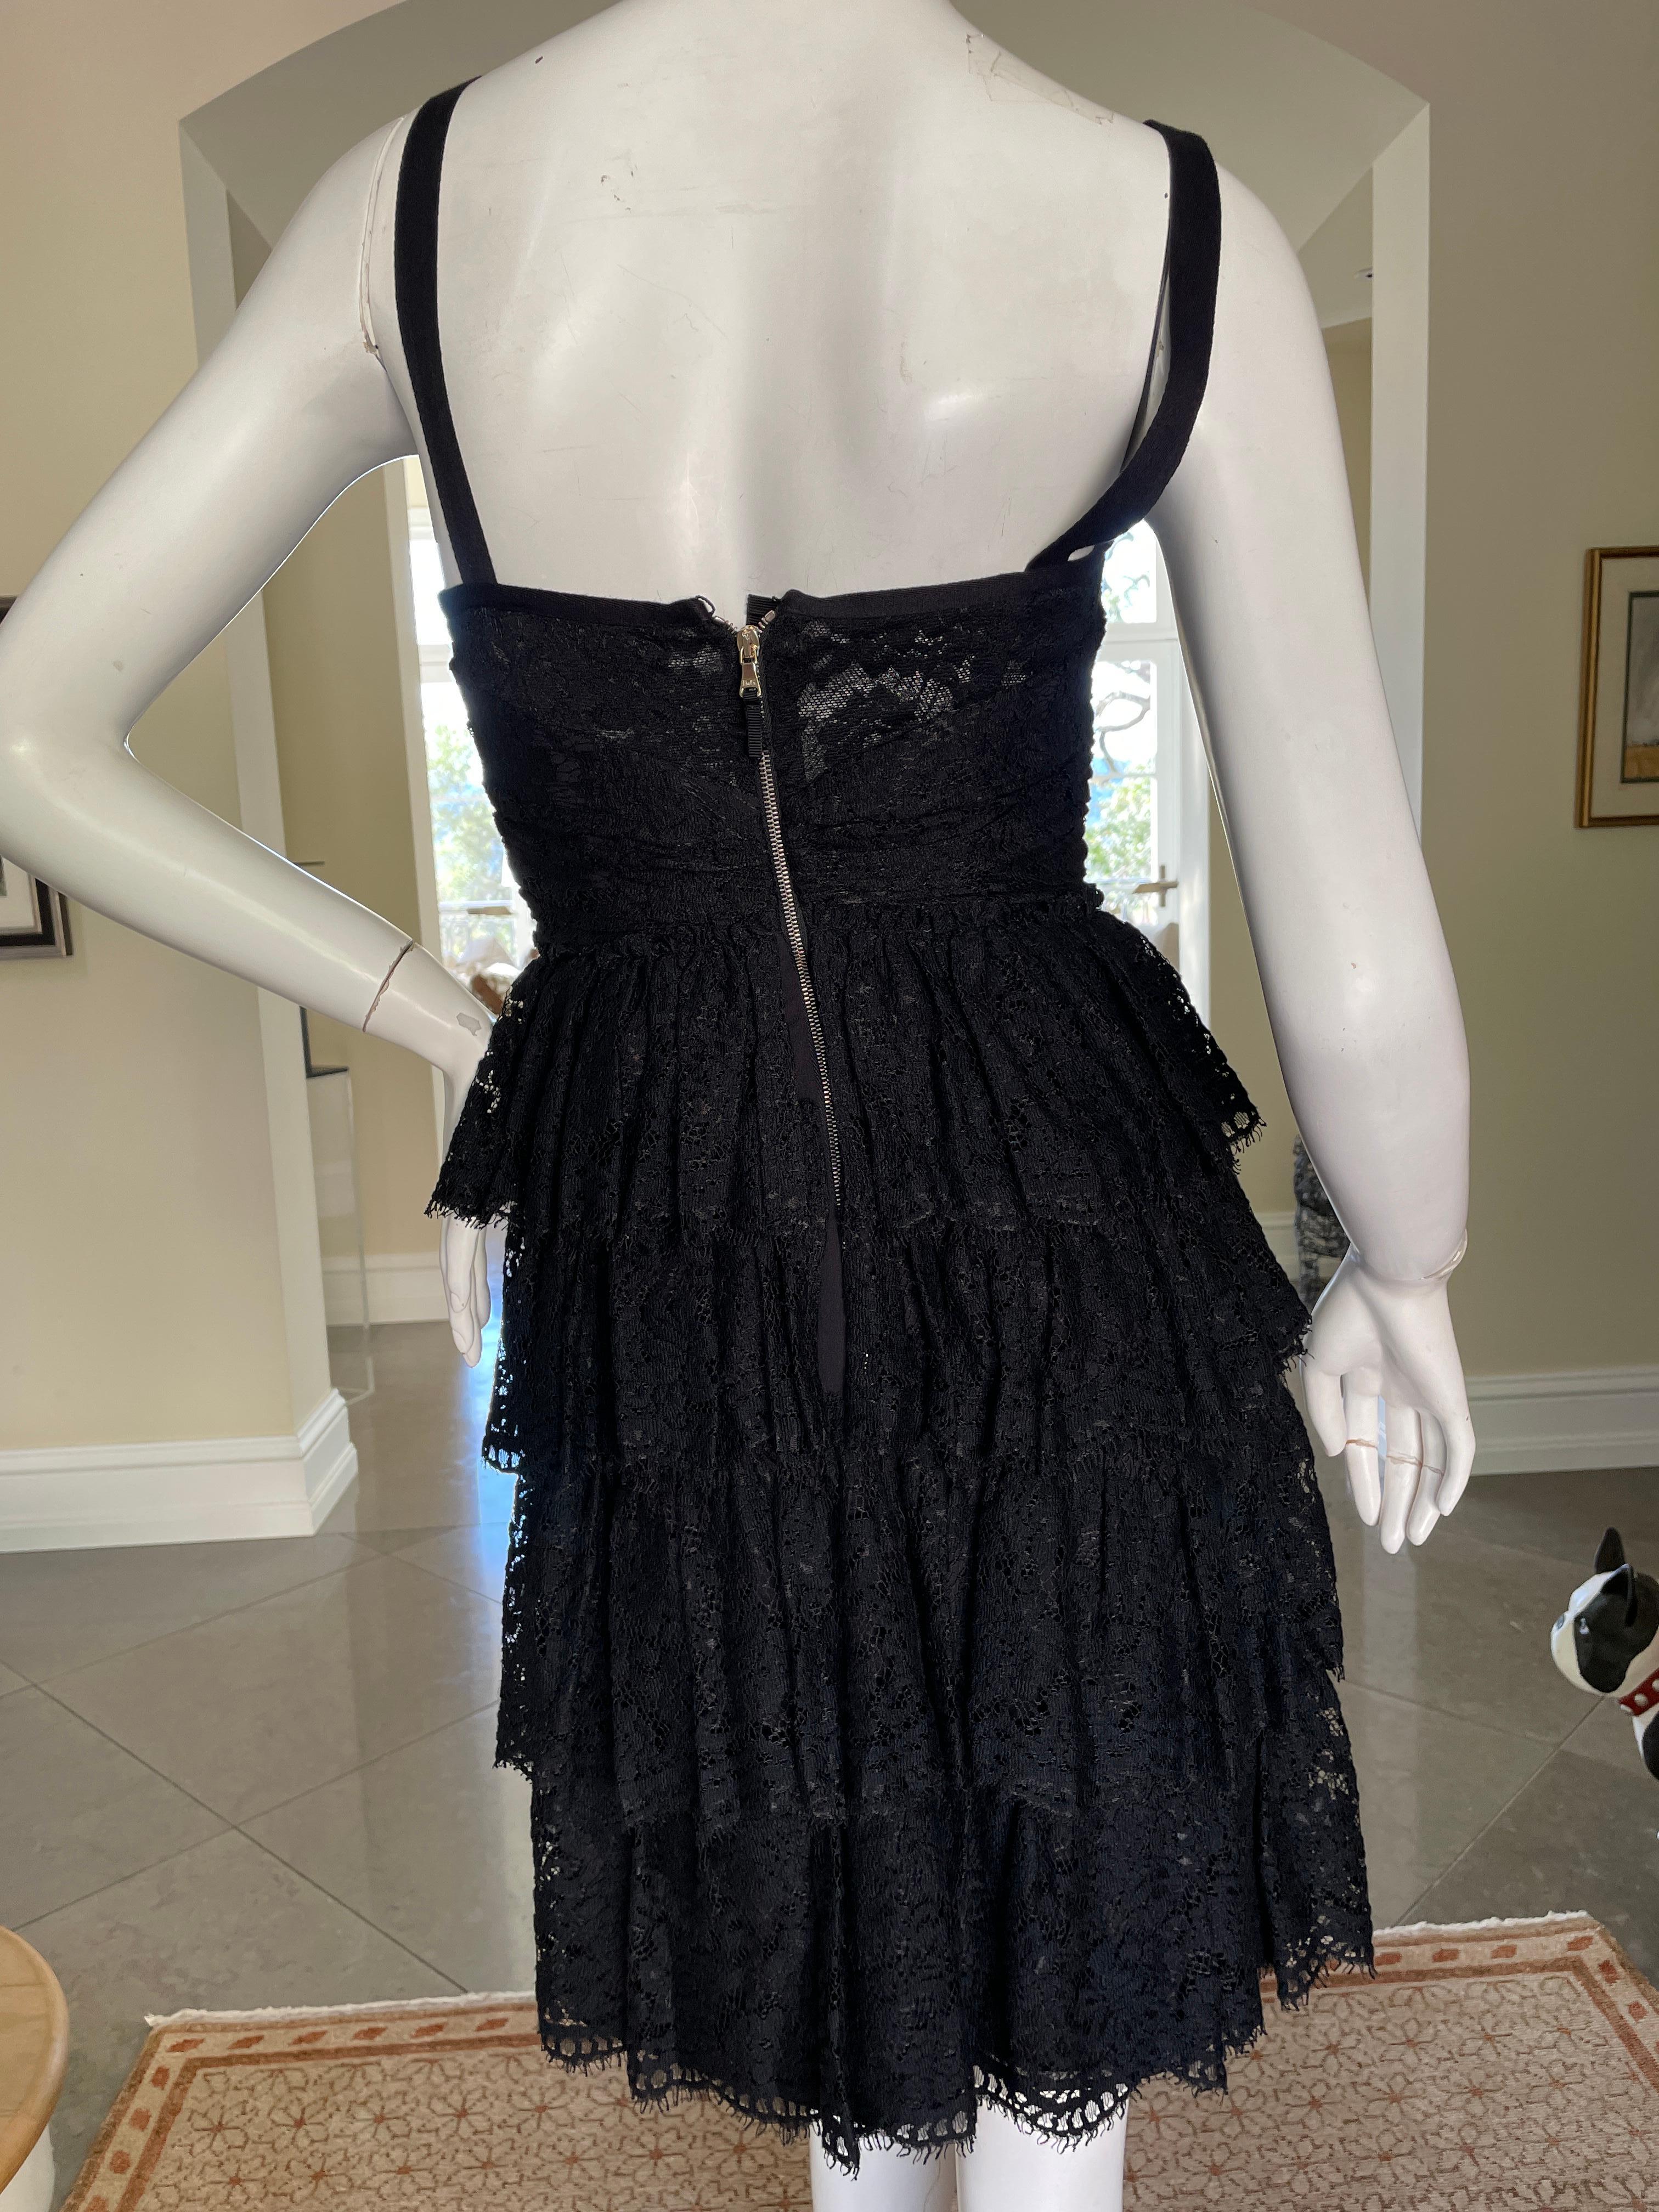 D&G by Dolce & Gabbana Vintage Black Lace Tiered Cocktail Dress
  Size 40
 Bust 34